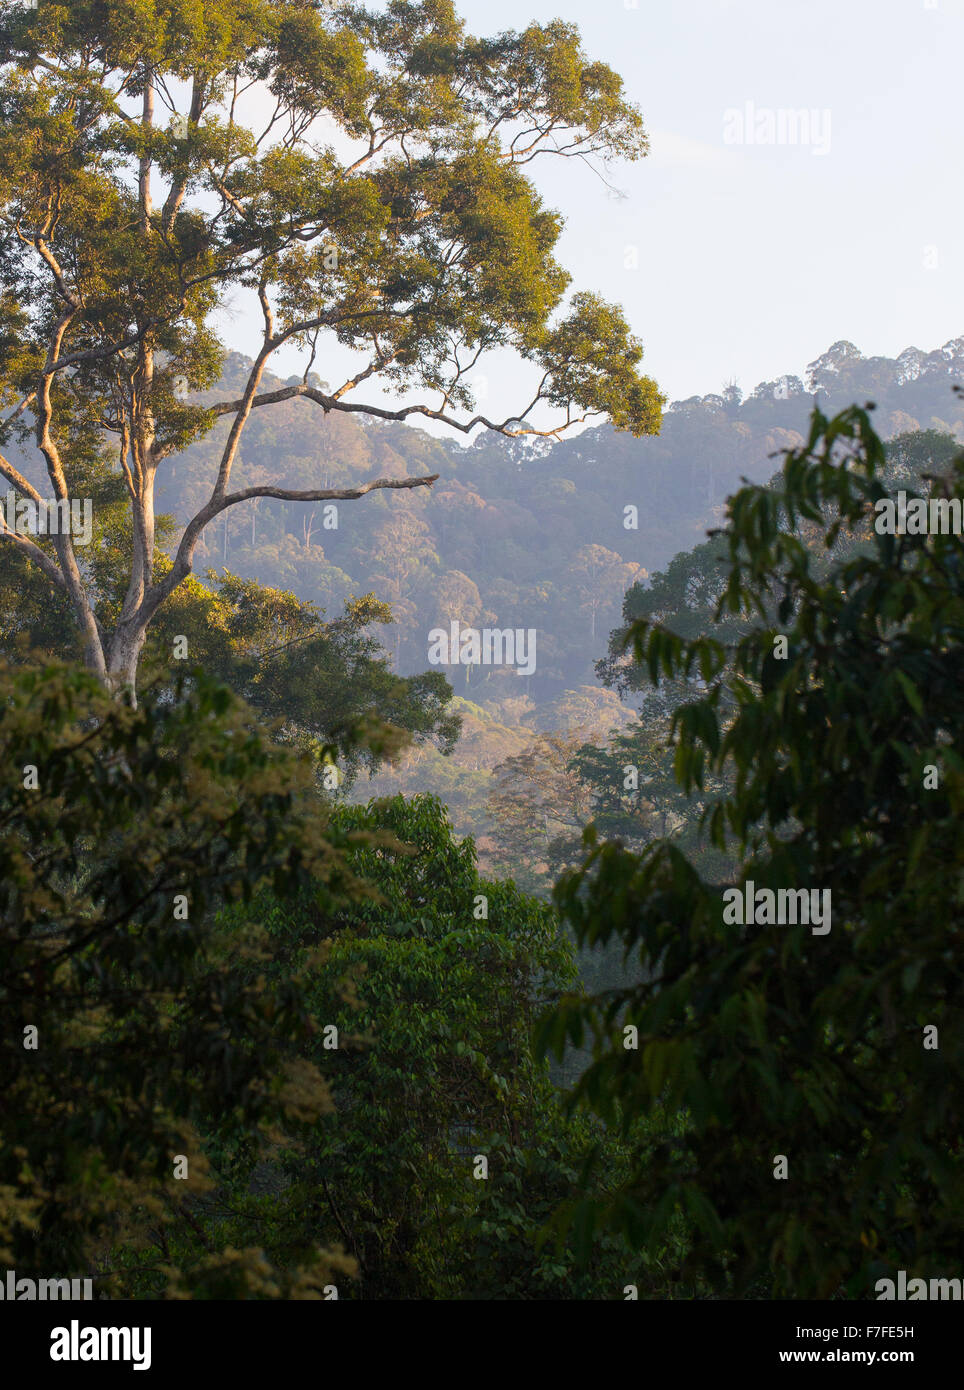 Tropical rainforest in the Danum Valley Conservation Area, Sabah, Malaysia Stock Photo